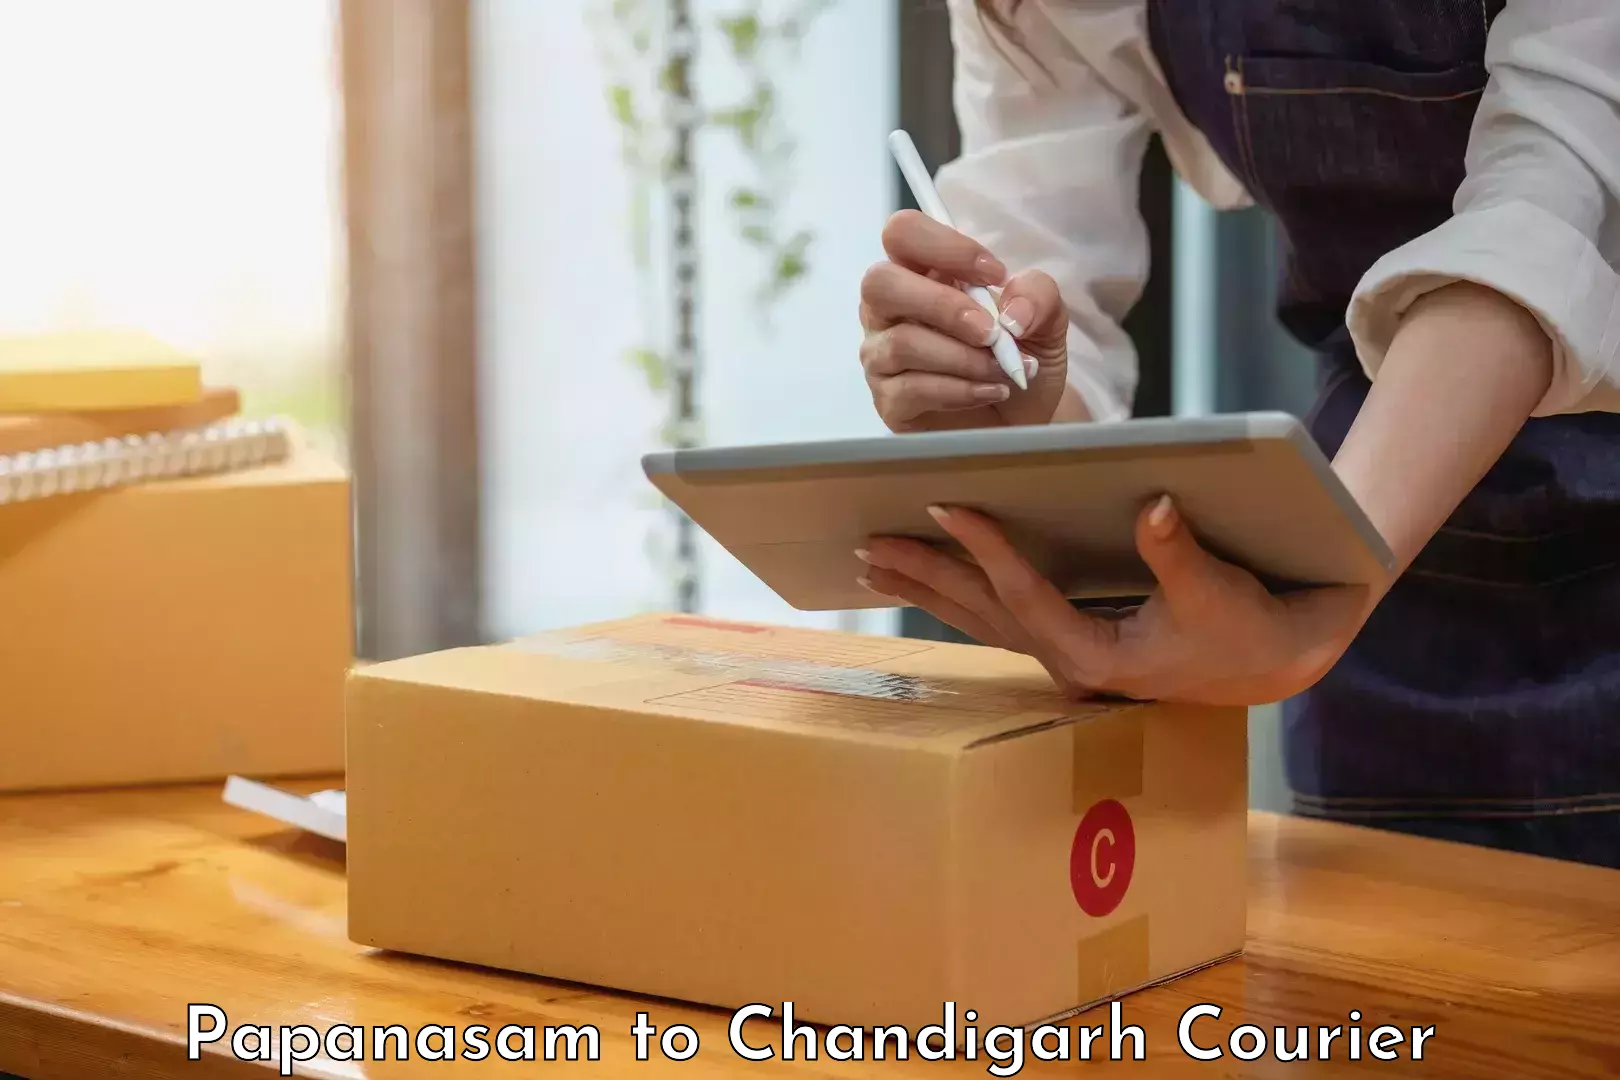 Courier service partnerships Papanasam to Chandigarh